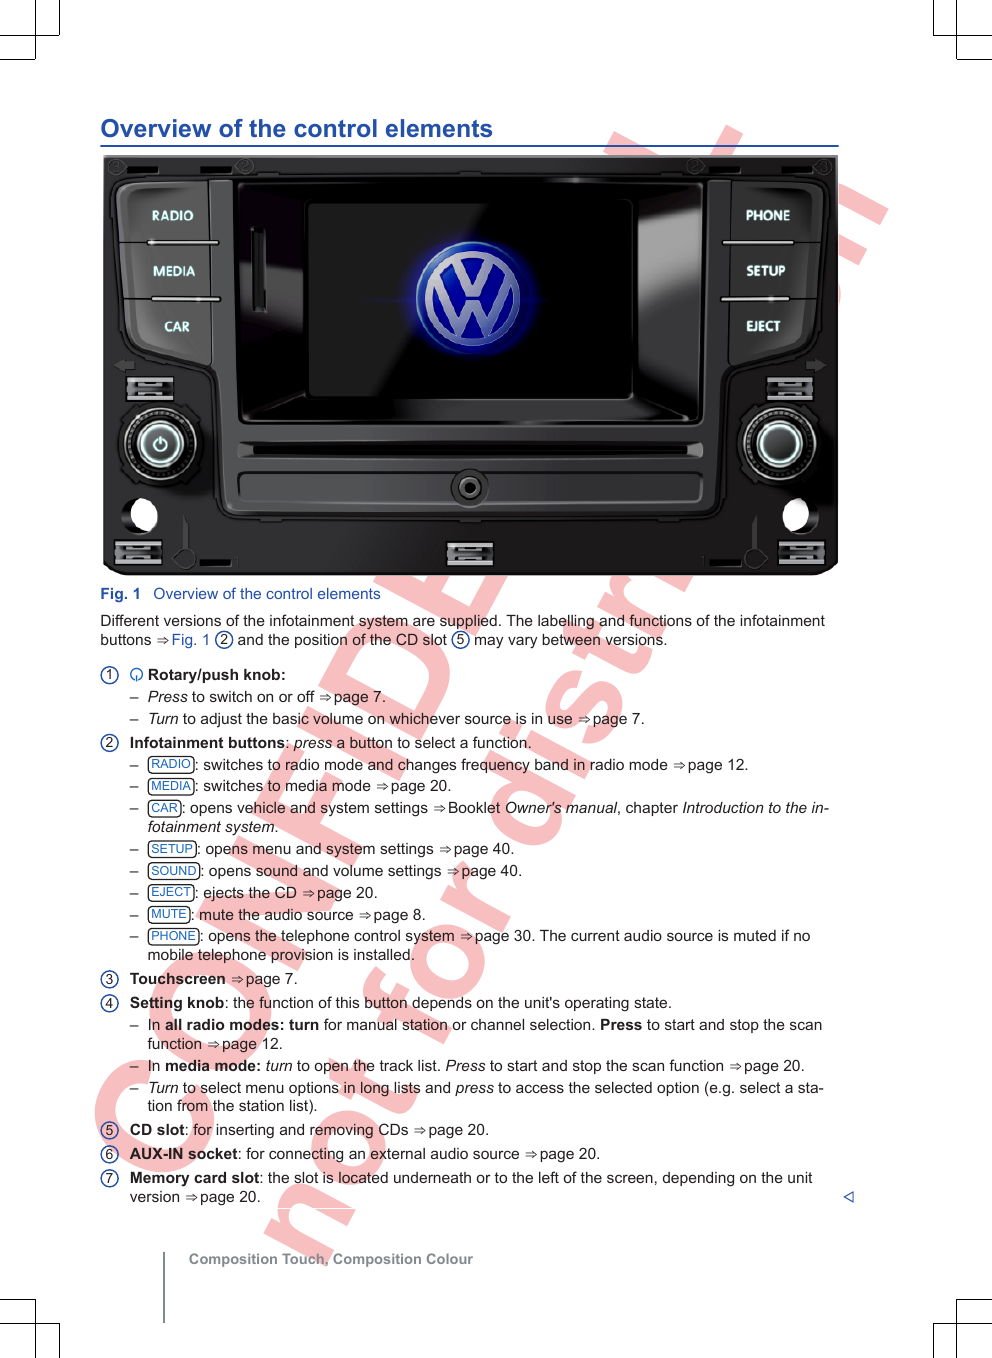  CONFIDENTIAL not for distribution Overview of the control elementsFig. 1  Overview of the control elementsDifferent versions of the infotainment system are supplied. The labelling and functions of the infotainmentbuttons ⇒ Fig. 1  2 and the position of the CD slot  5 may vary between versions. Rotary/push knob:–Press to switch on or off ⇒ page 7.–Turn to adjust the basic volume on whichever source is in use ⇒ page 7.Infotainment buttons: press a button to select a function.–RADIO : switches to radio mode and changes frequency band in radio mode ⇒ page 12.–MEDIA : switches to media mode ⇒ page 20.–CAR : opens vehicle and system settings ⇒ Booklet Owner&apos;s manual, chapter Introduction to the in-fotainment system.–SETUP : opens menu and system settings ⇒ page 40.–SOUND : opens sound and volume settings ⇒ page 40.–EJECT : ejects the CD ⇒ page 20.–MUTE : mute the audio source ⇒ page 8.–PHONE : opens the telephone control system ⇒ page 30. The current audio source is muted if nomobile telephone provision is installed.Touchscreen ⇒ page 7.Setting knob: the function of this button depends on the unit&apos;s operating state.– In all radio modes: turn for manual station or channel selection. Press to start and stop the scanfunction ⇒ page 12.– In media mode: turn to open the track list. Press to start and stop the scan function ⇒ page 20.–Turn to select menu options in long lists and press to access the selected option (e.g. select a sta-tion from the station list).CD slot: for inserting and removing CDs ⇒ page 20.AUX-IN socket: for connecting an external audio source ⇒ page 20.Memory card slot: the slot is located underneath or to the left of the screen, depending on the unitversion ⇒ page 20. 1234567Composition Touch, Composition Colour